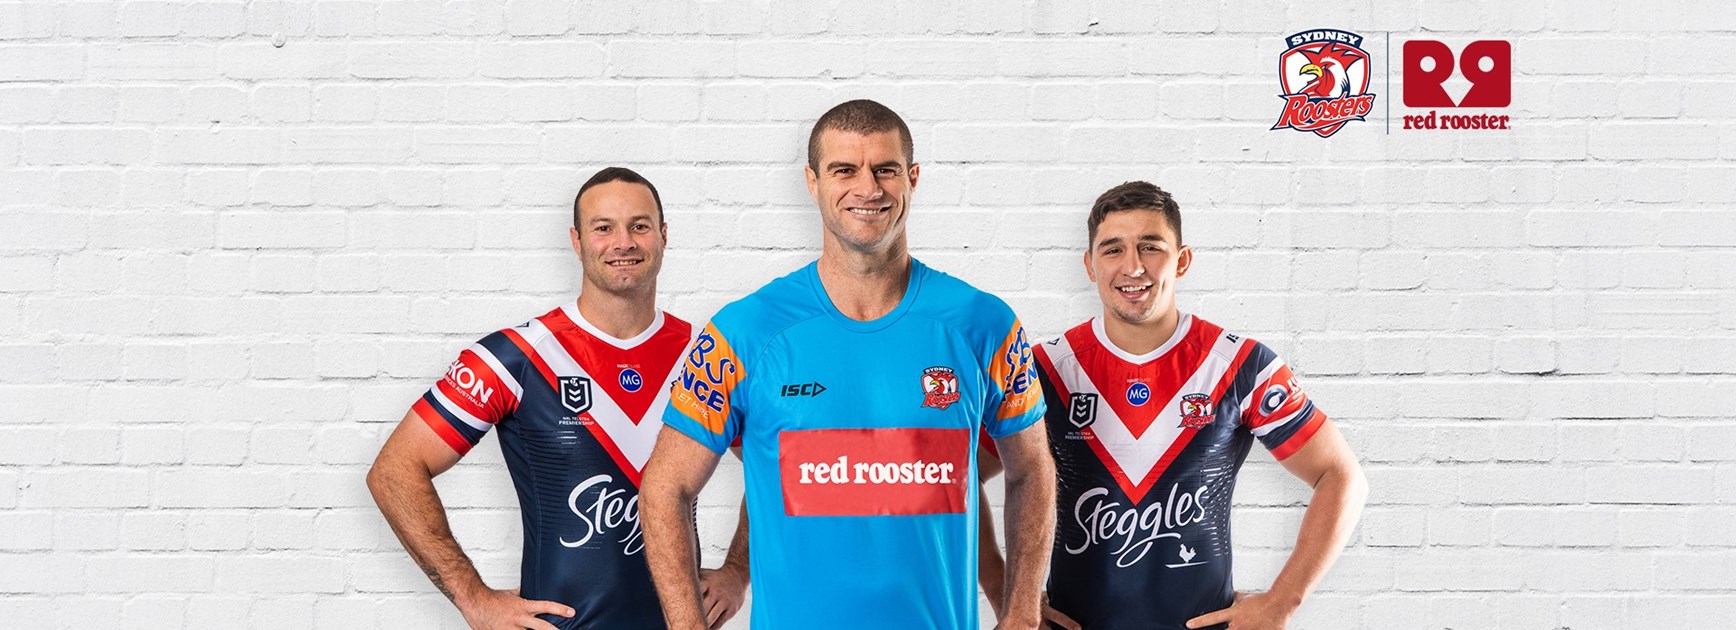 Sydney Roosters proud to partner with Red Rooster